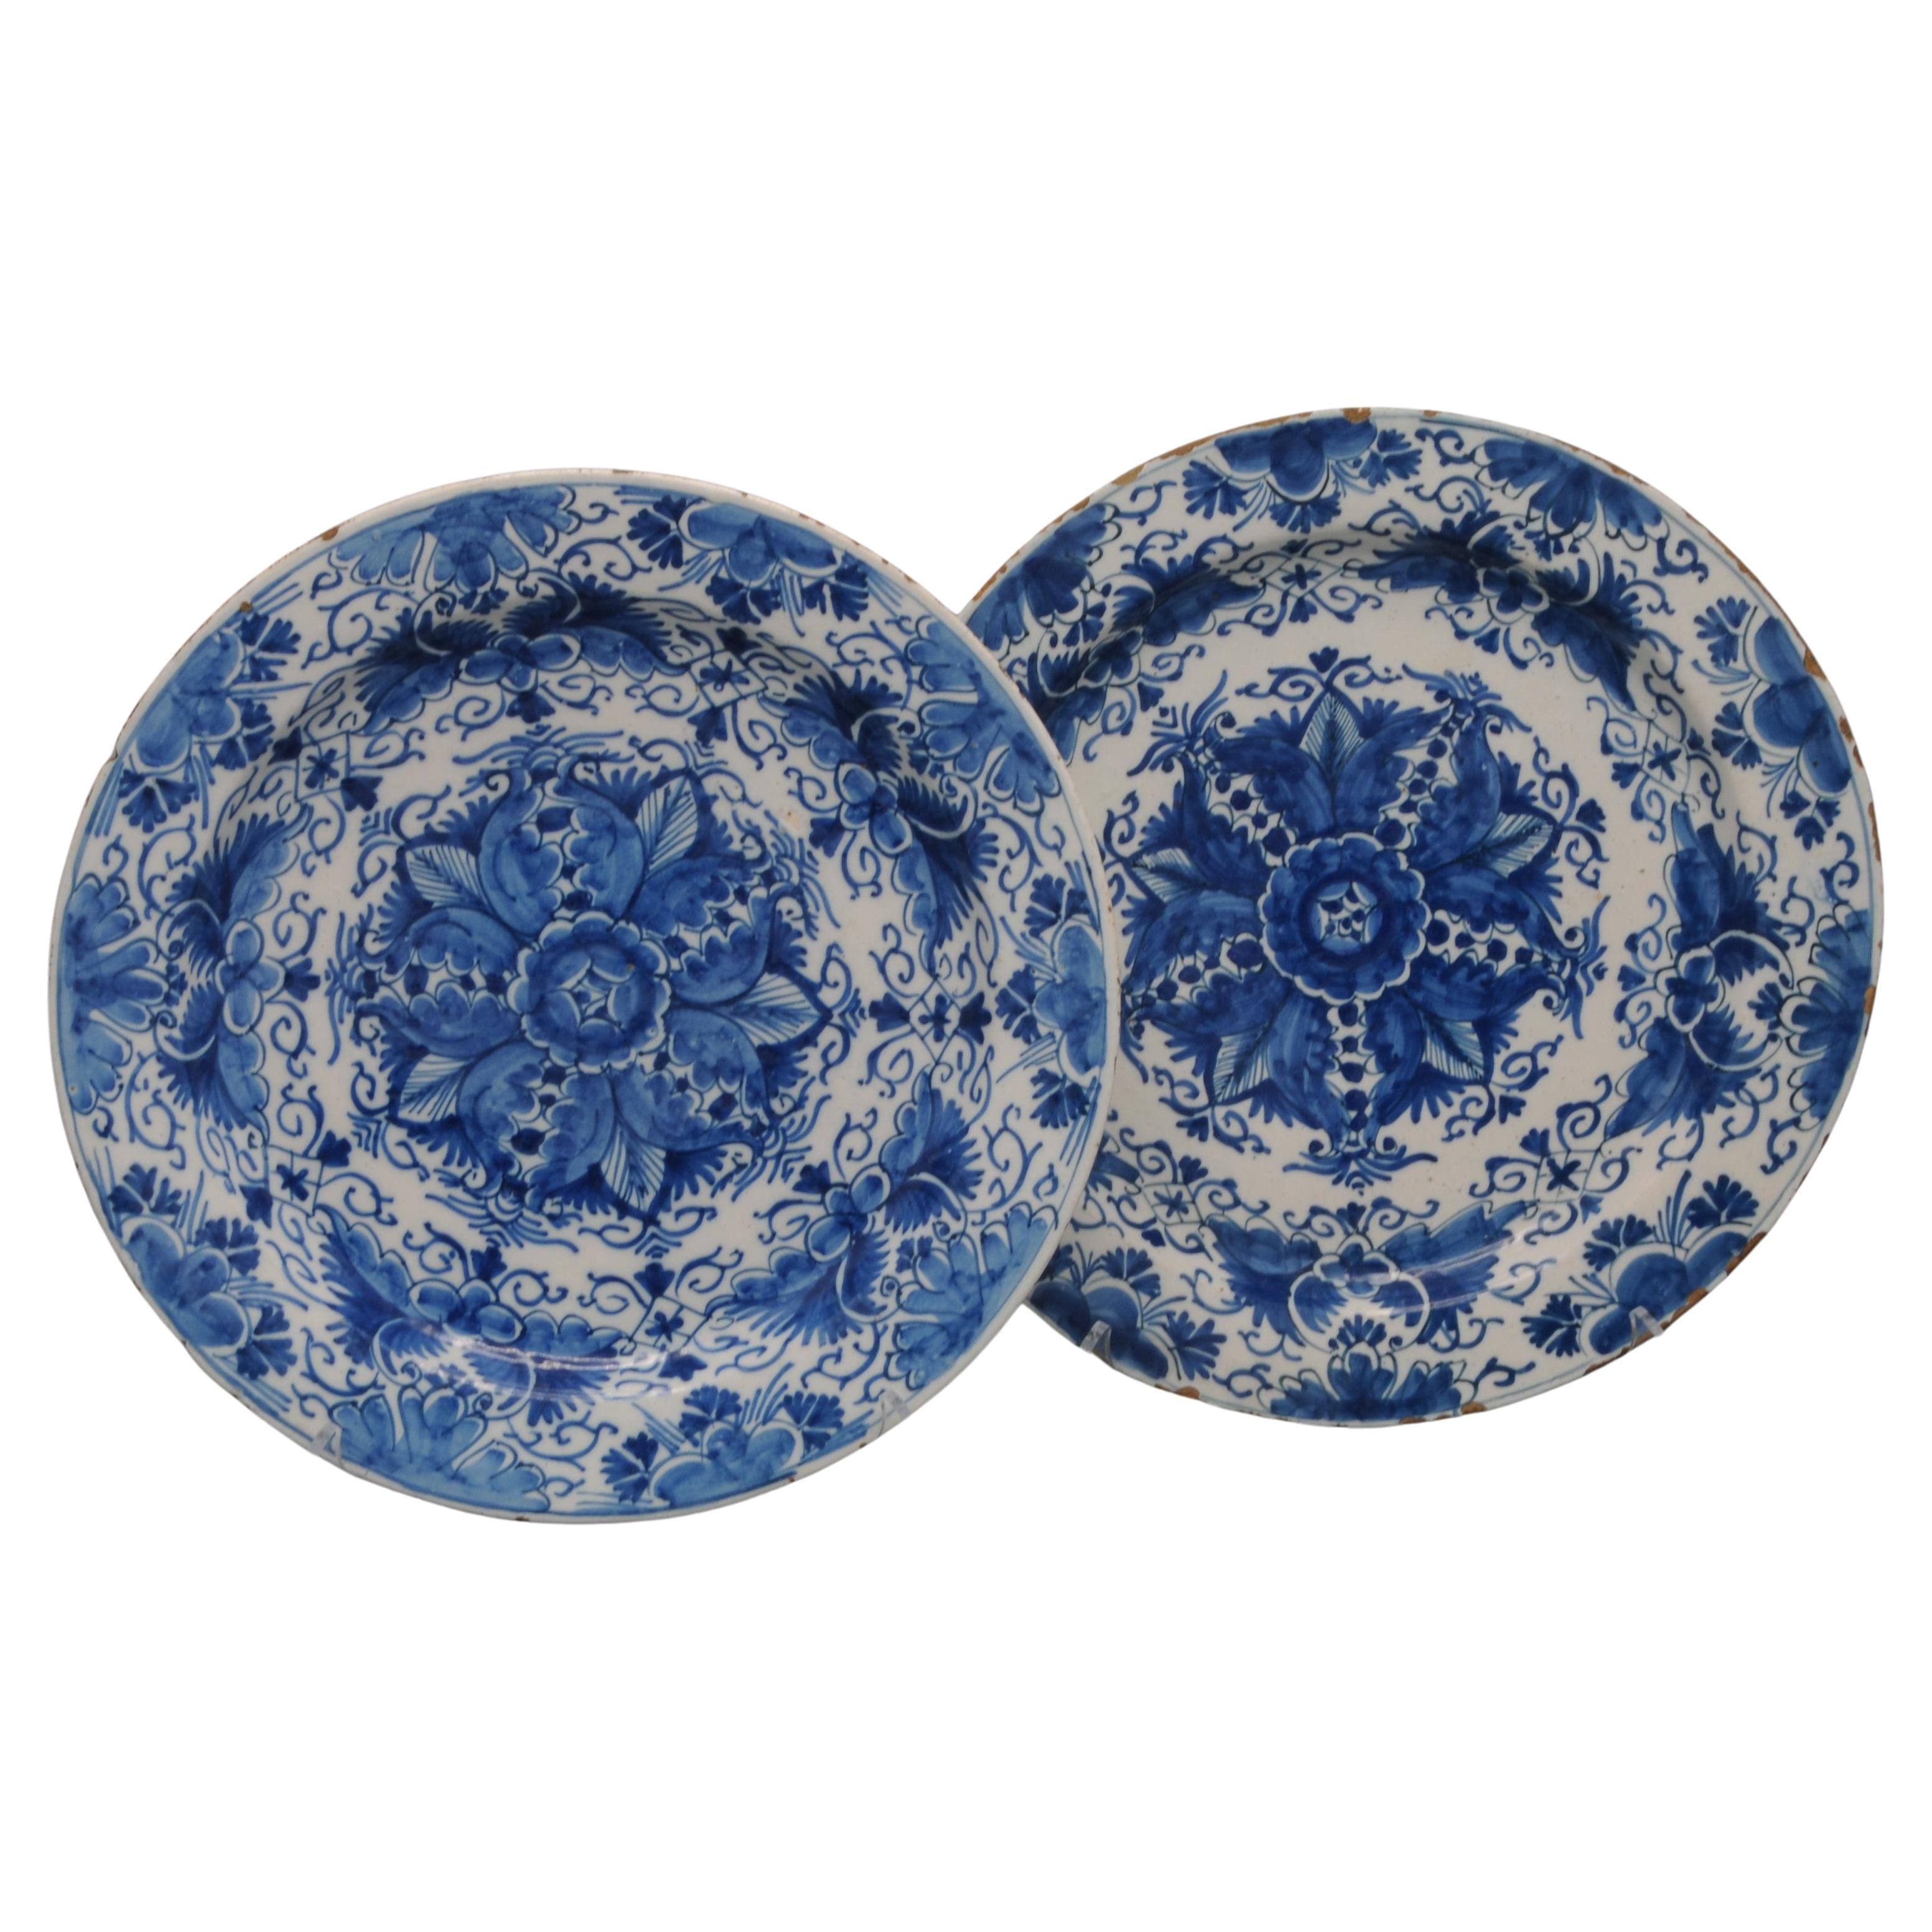 Delft - Pair of dishes - 18th century 